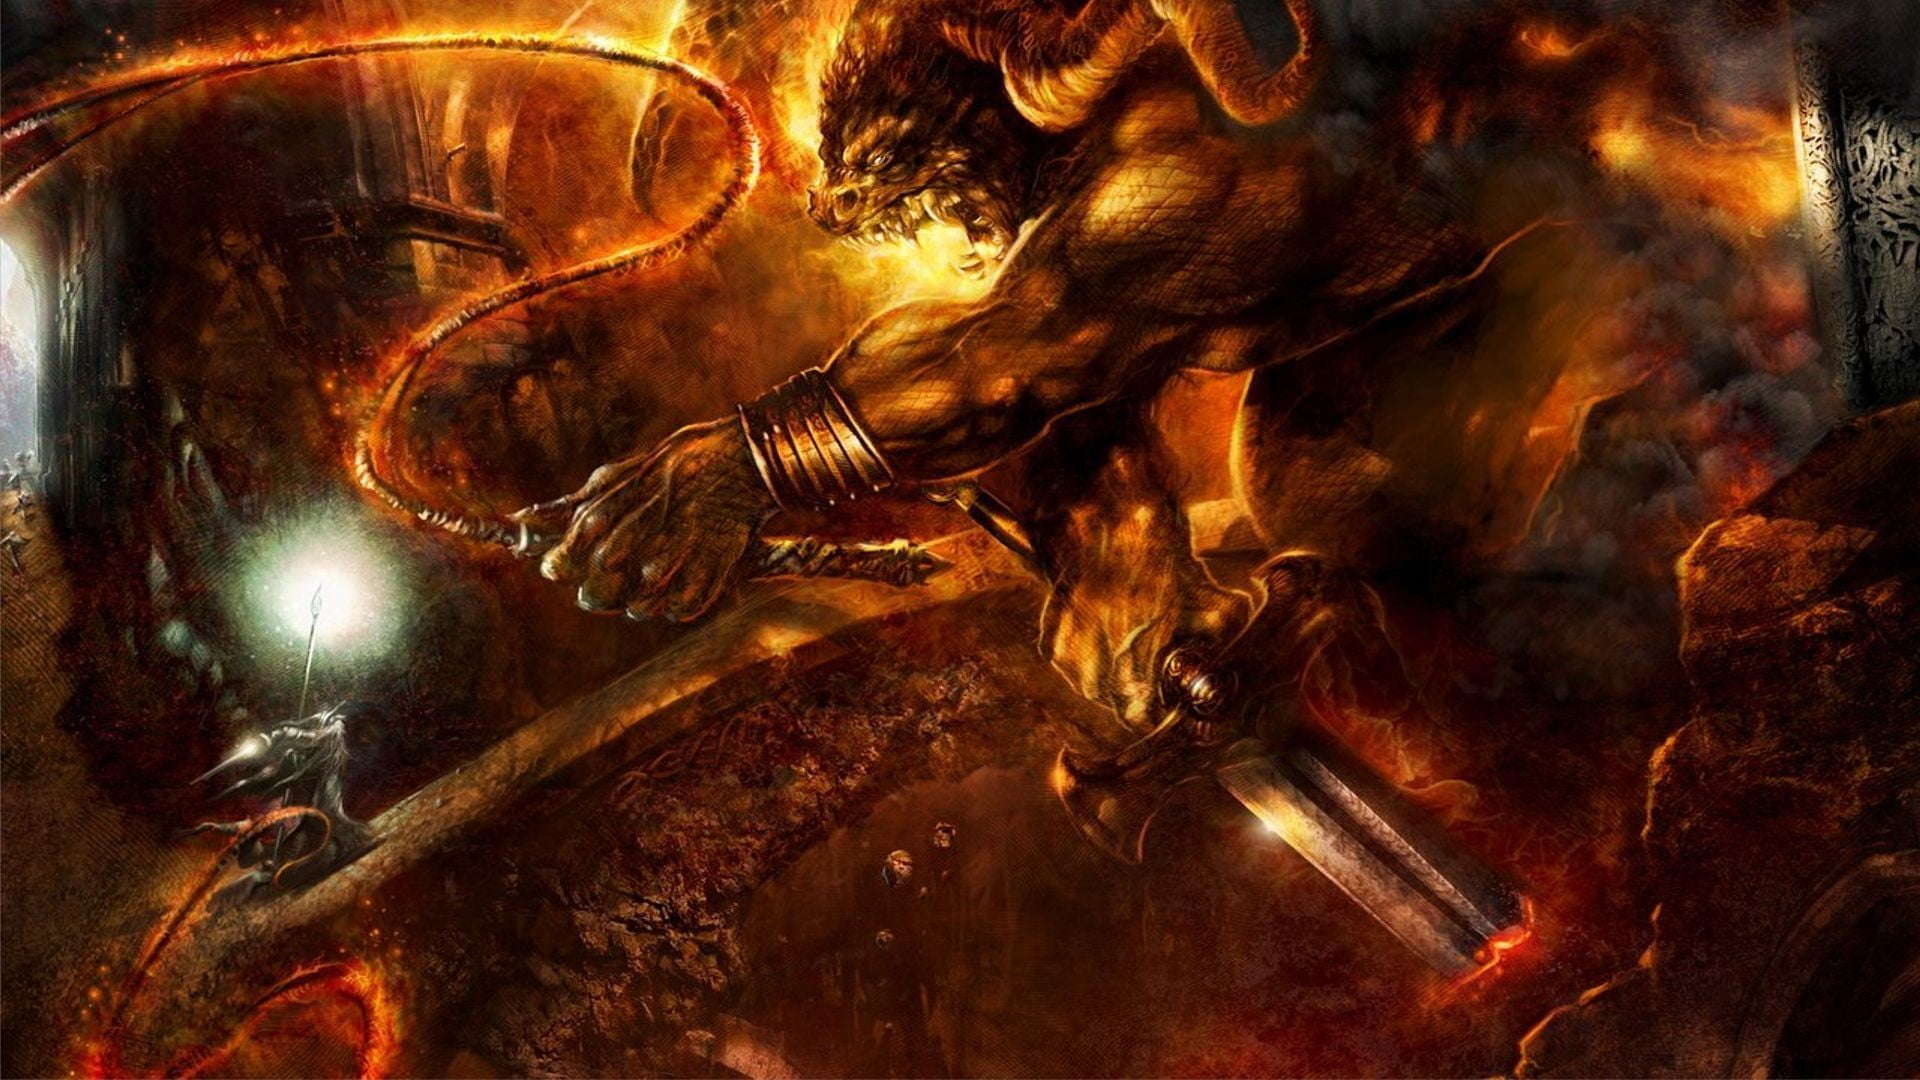 video game screenshot, taurus monster with flaming whip, The Lord of the Rings